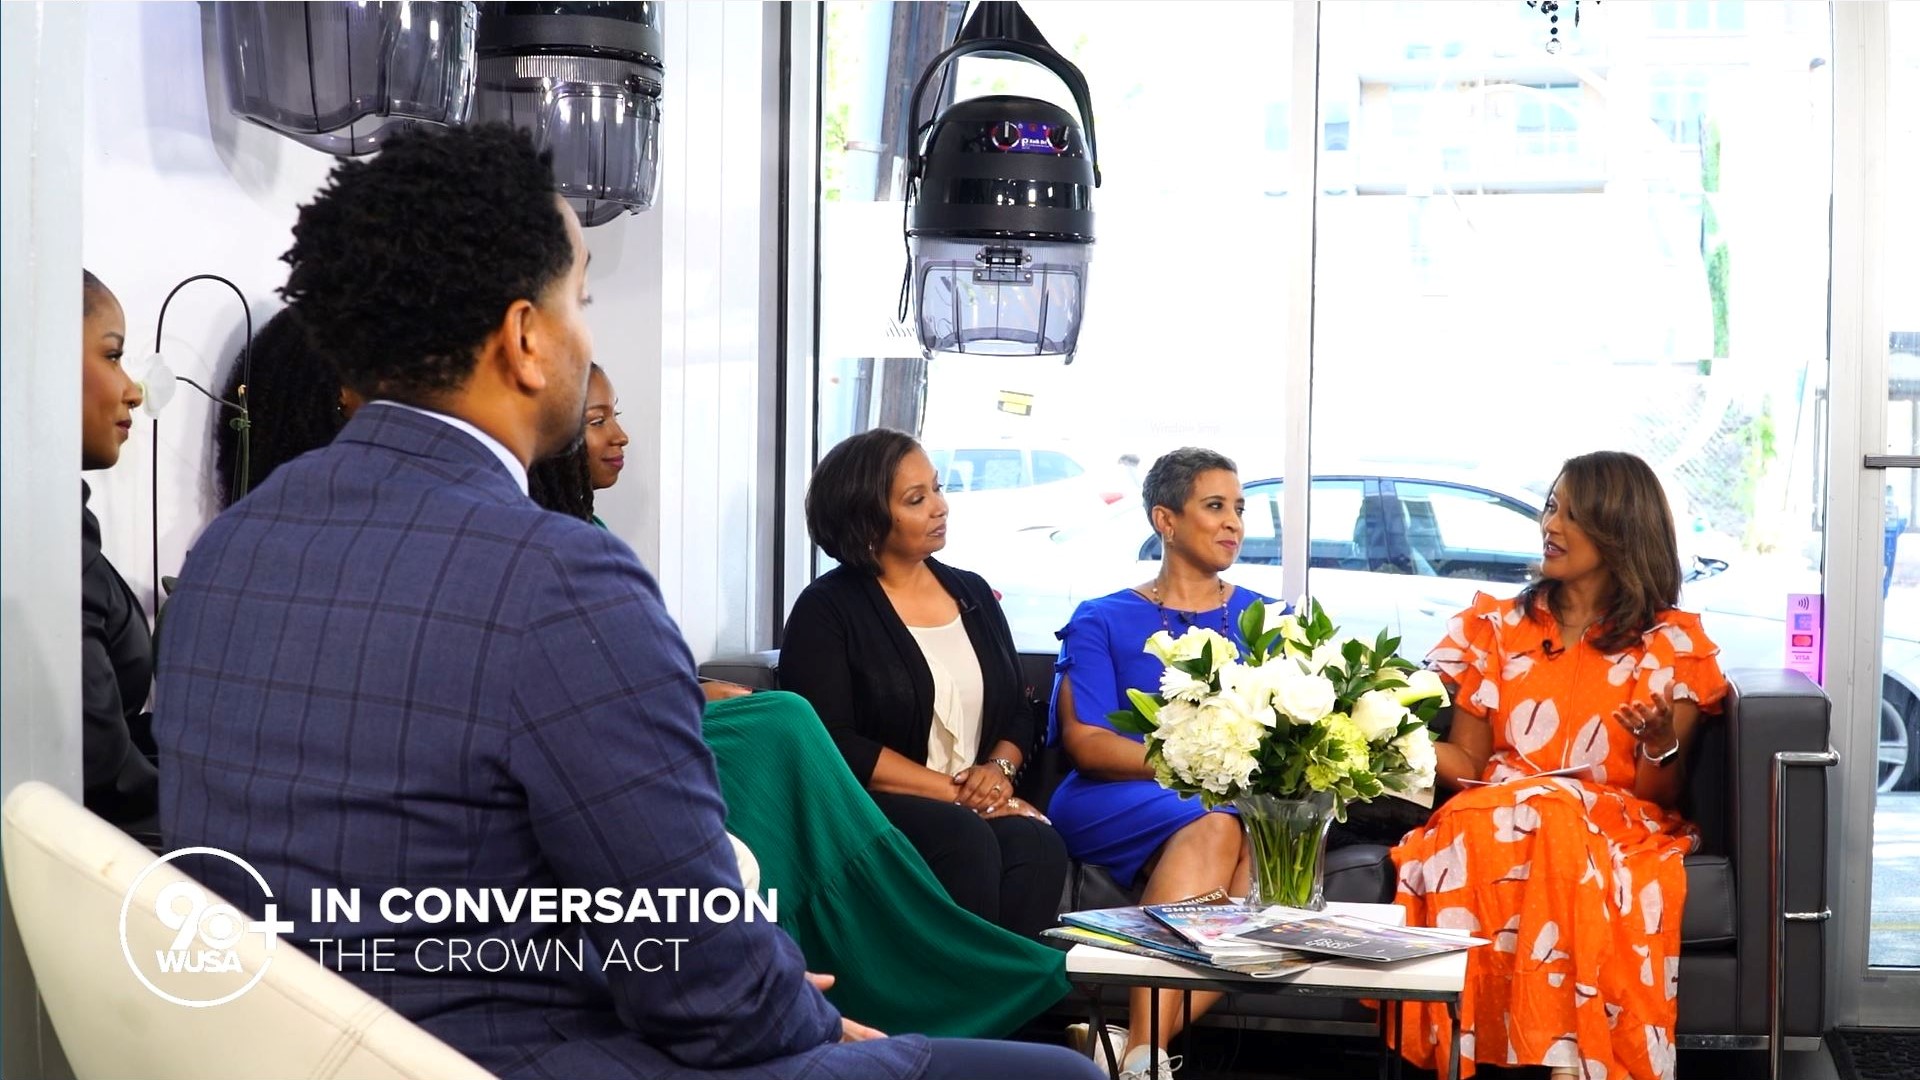 Join WUSA9's Lesli Foster, Delia Goncalves, and Allison Seymour as they have a conversation with 3 women who have experienced race-based hair discrimination.